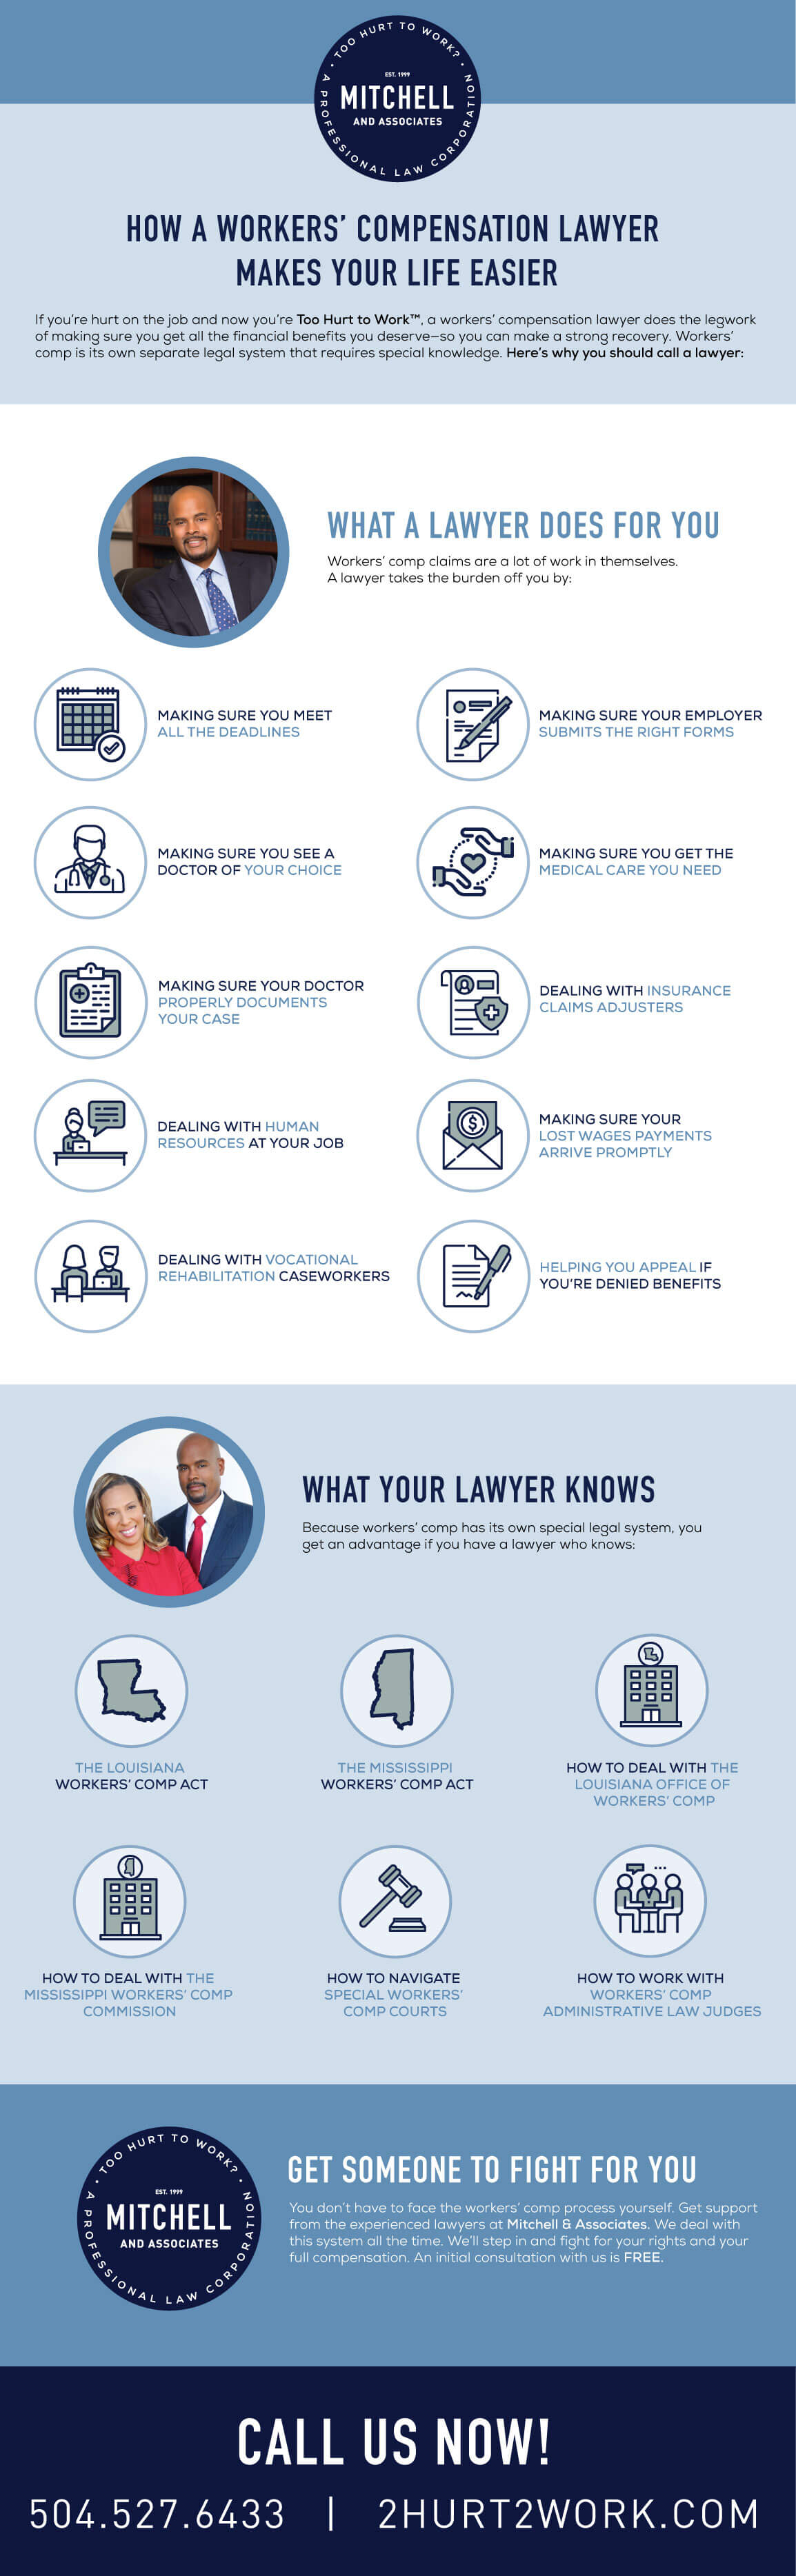 MITCH_whyALawyer_Infographic-1